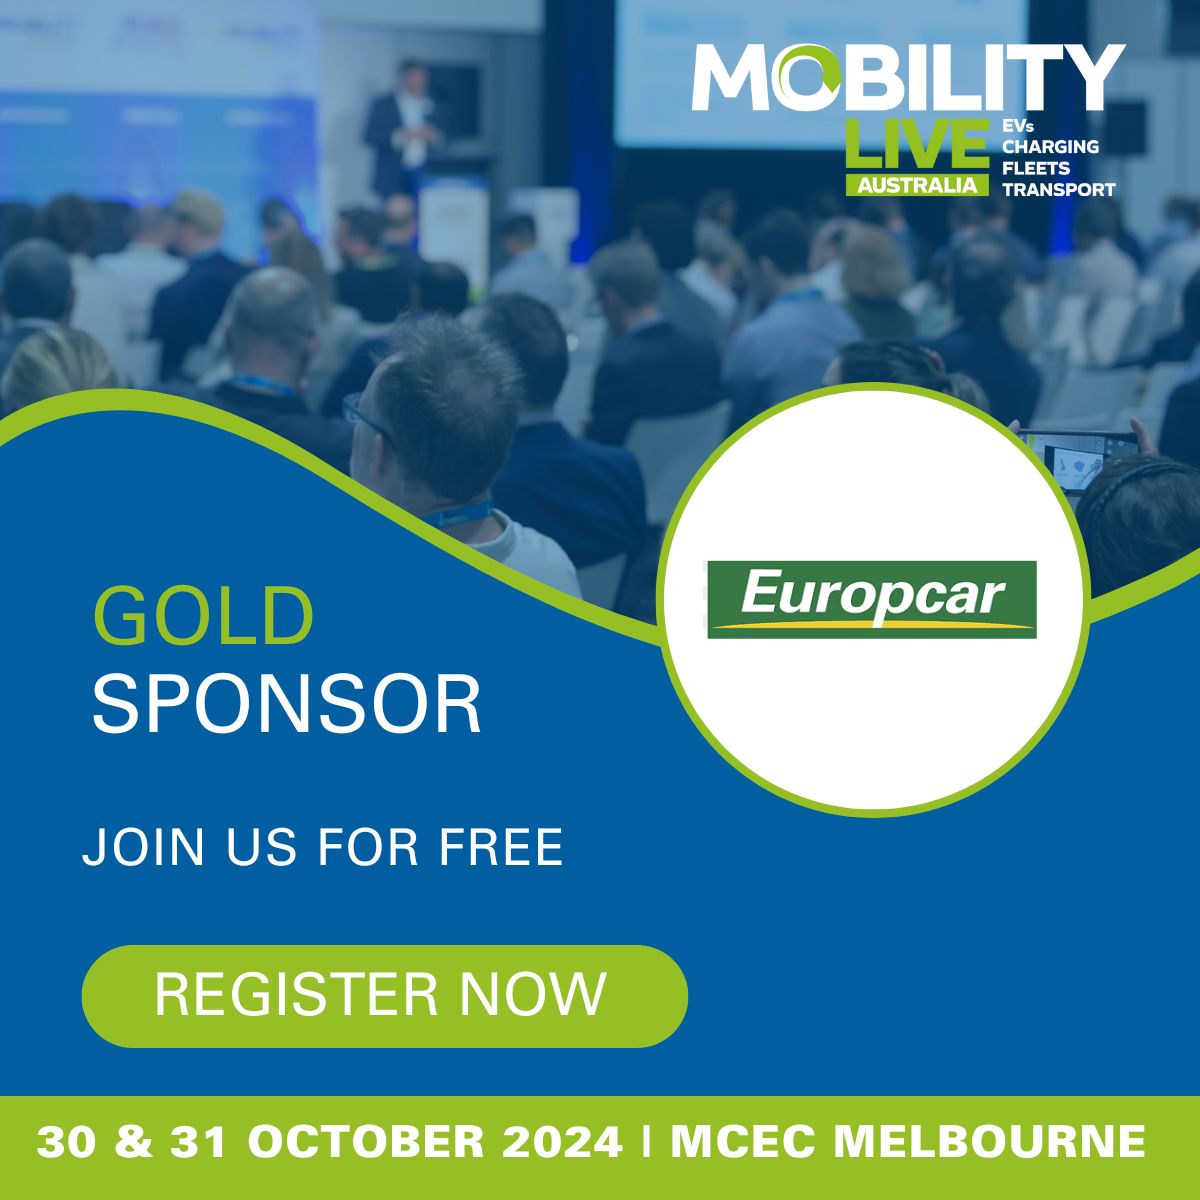 Thrilled to welcome Europcar as a Gold Sponsor for Mobility LIVE 2024! 

Join us on 30 & 31 October at the Melbourne Convention & Exhibition Centre for an incredible showcase of mobility innovation. Let's drive into the future together with Europcar! 

#Europcar #MobilityLIVE